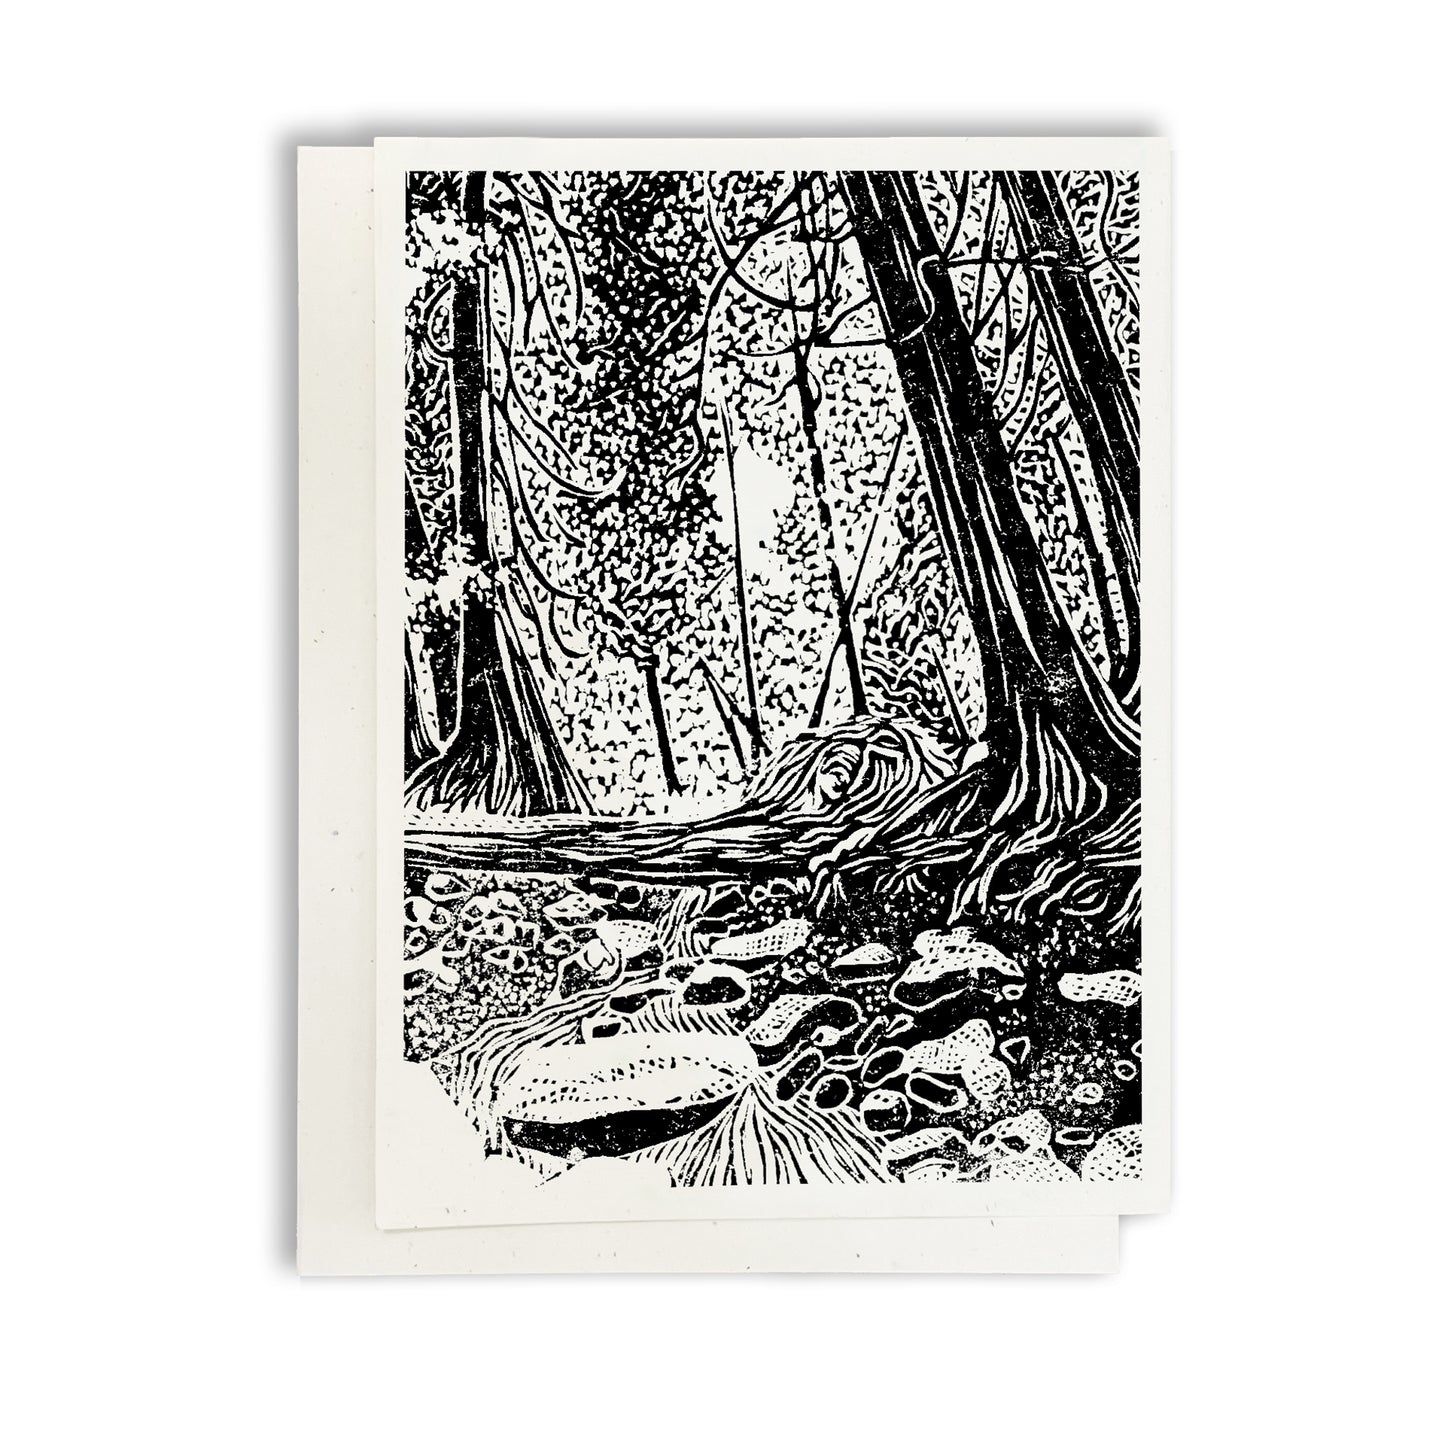 Brown's Brook. A casually elegant card featuring a digital reproduction of a block print design with the same title by Natalia Wohletz of Peninsula Prints, Milford and Mackinac Island, Michigan.